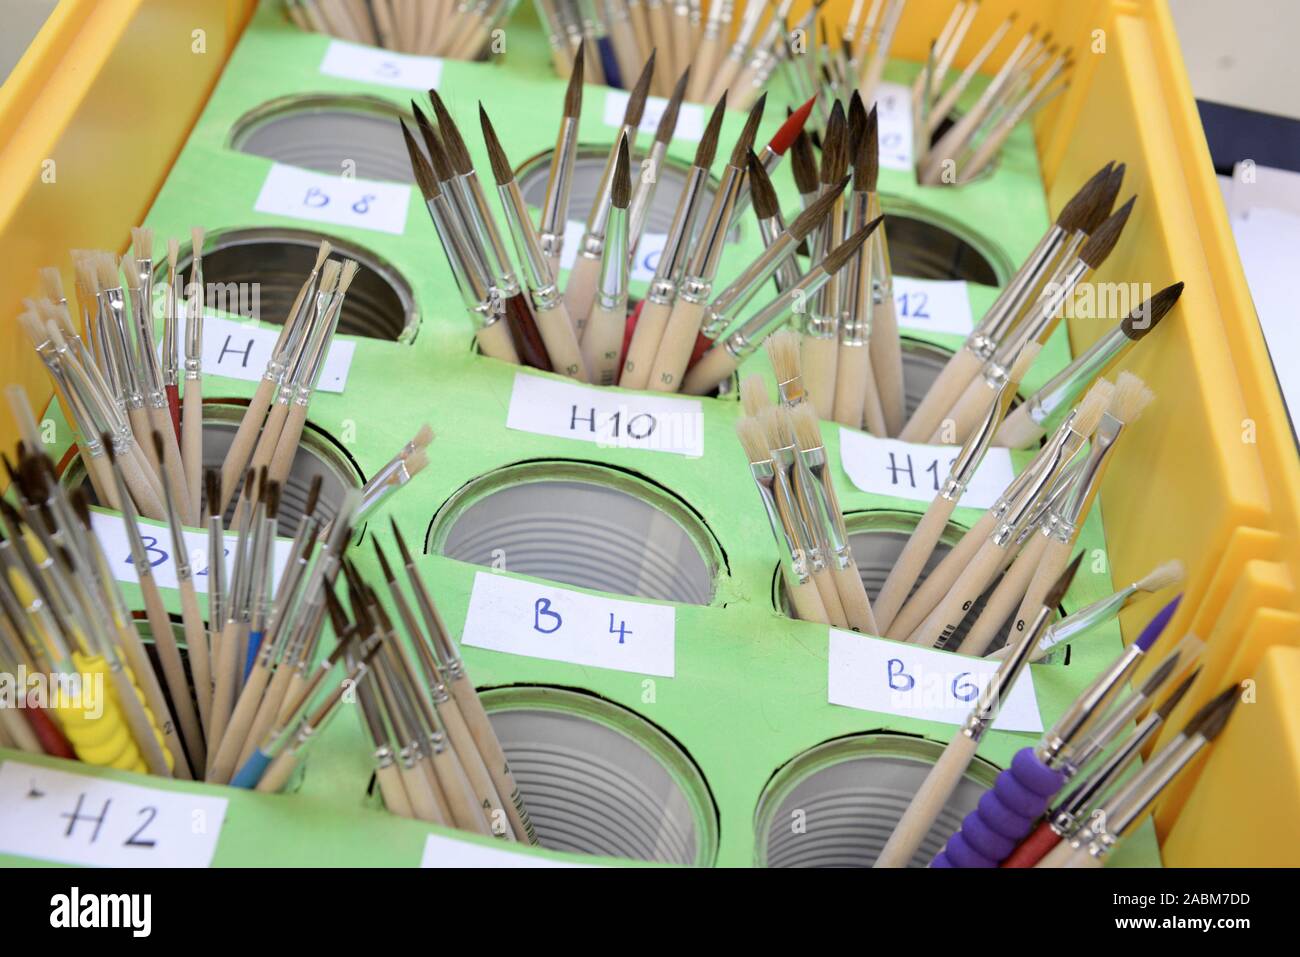 The foundation 'Wir helfen München' collects school material for children. Various initiatives such as 'Bunte Münchner Kindl' and 'Diakonia' from the Protestant Inner Mission are working together. Here brushes in different strengths for art lessons. [automated translation] Stock Photo